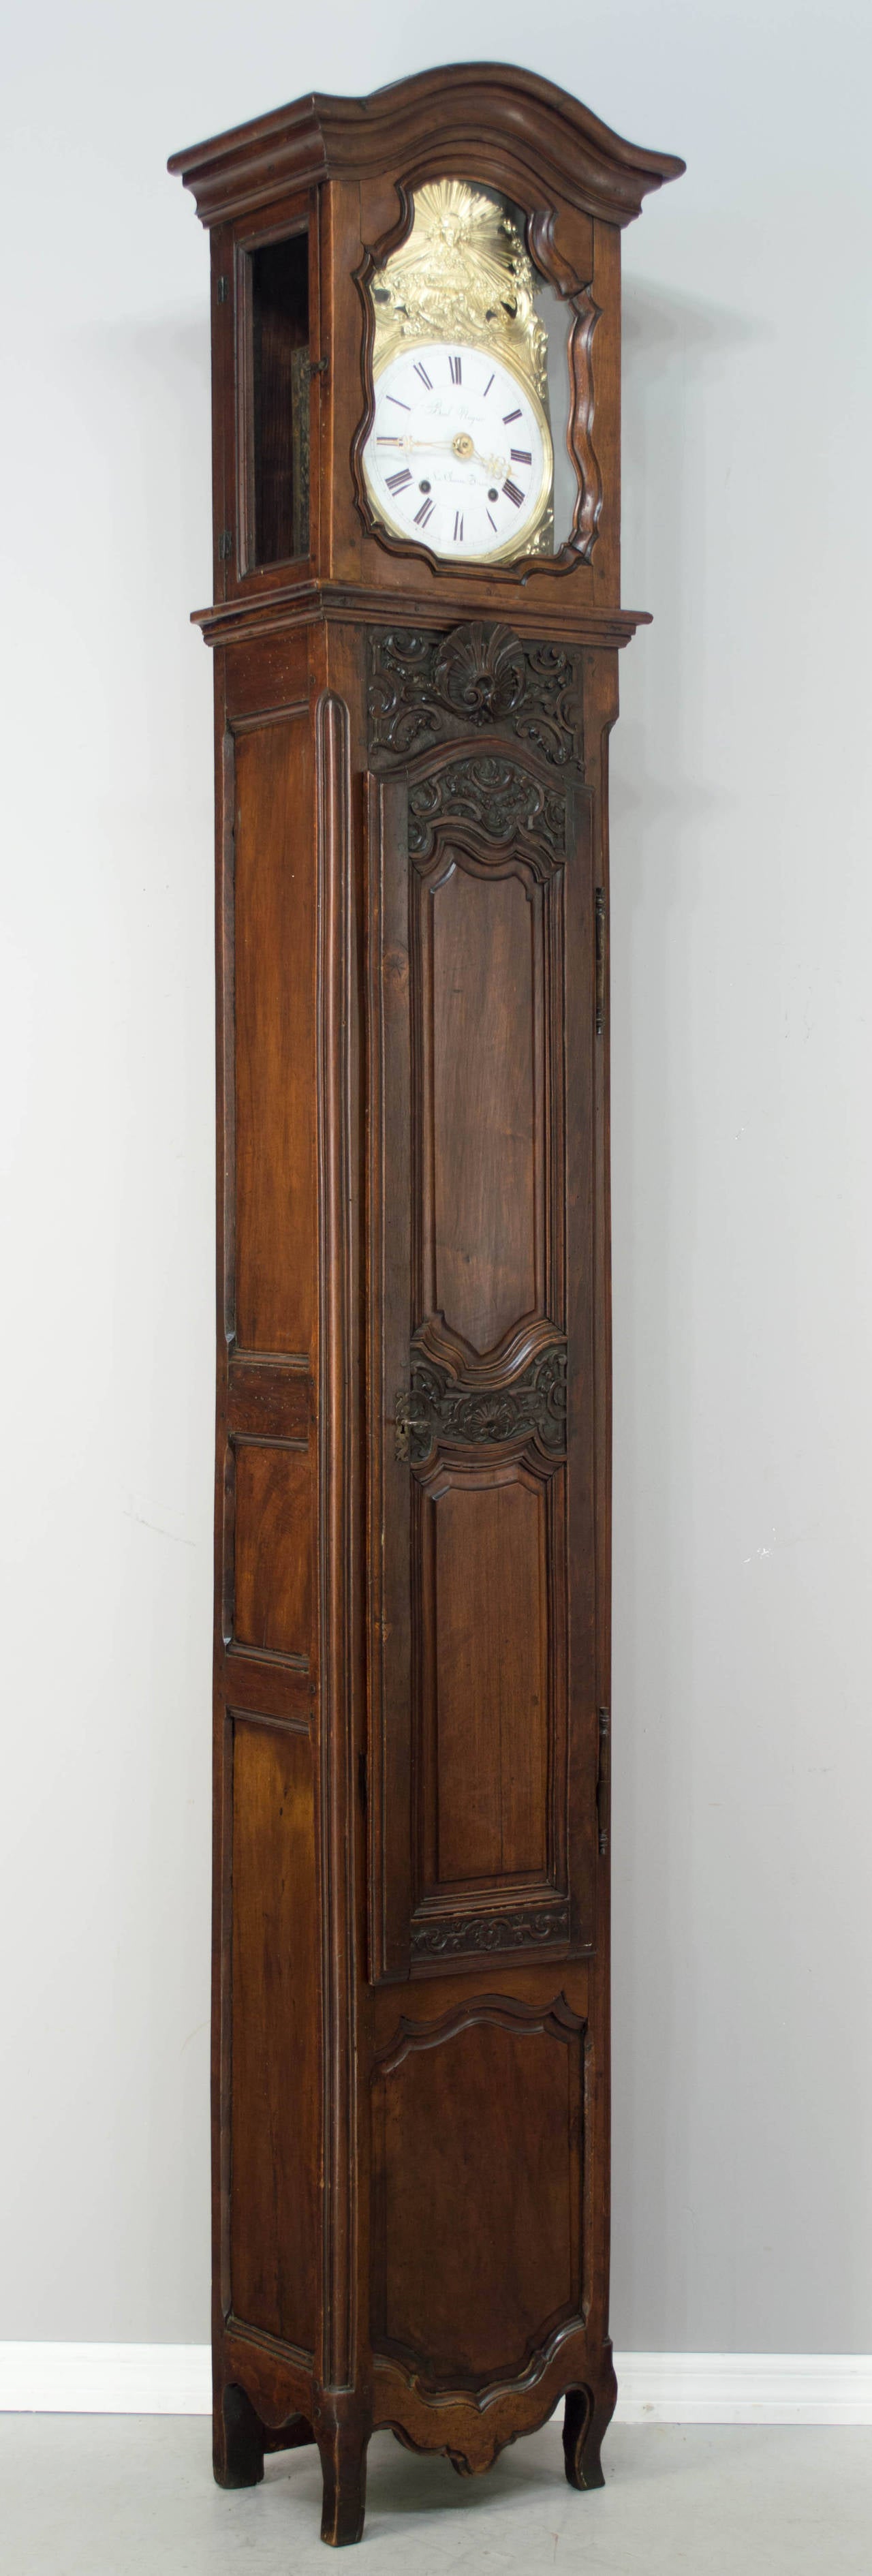 A splendid 19th century French Louis XV style Horloge De Parquet, or tall case clock, made of walnut with nice hand carvings and pegged construction. This grandfather clock is exceptionally tall, at almost nine feet. The case is in one piece with